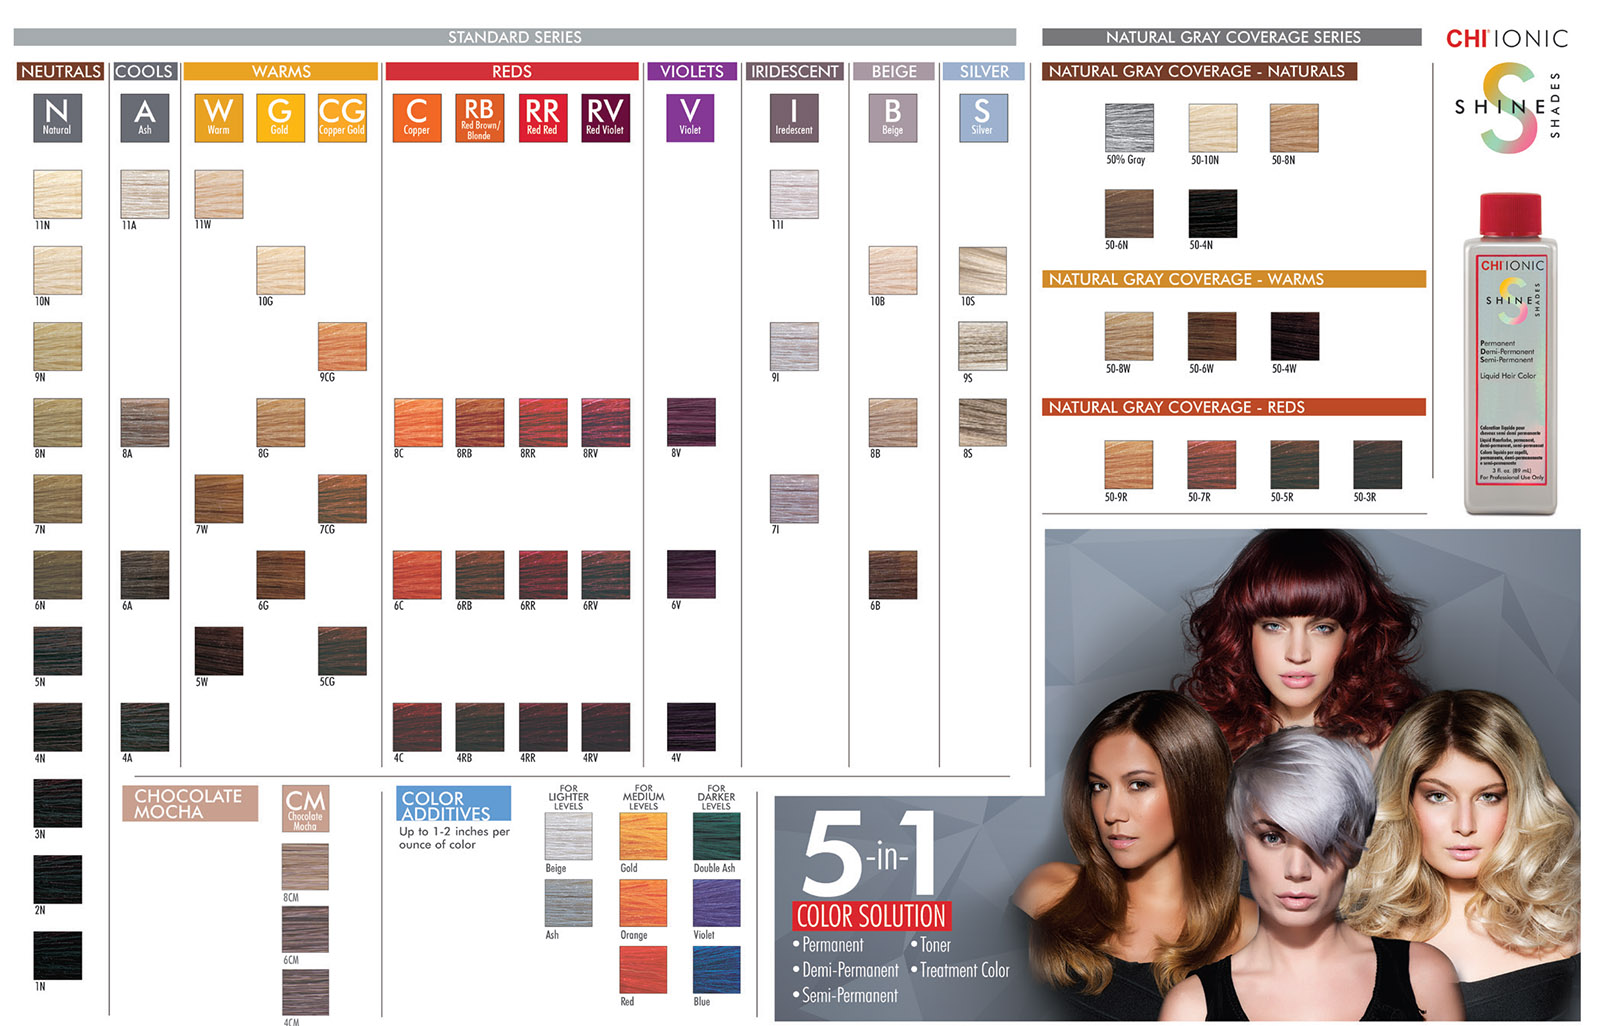 Chi Ionic Hair Color Chart